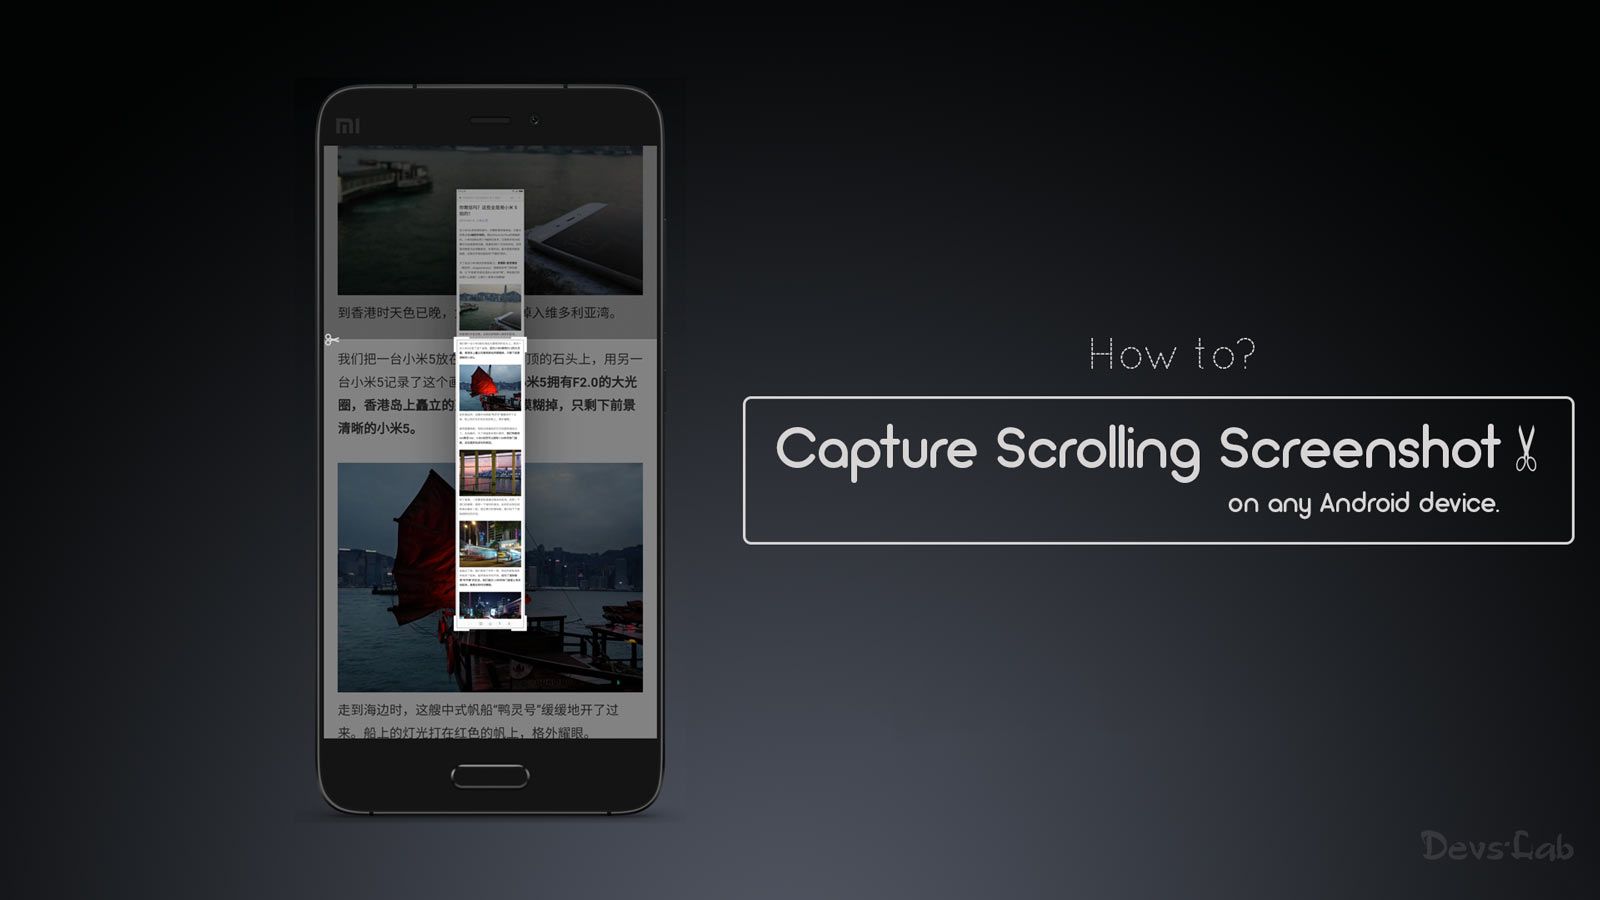 How to Capture Scrolling Screenshot on any Android device.